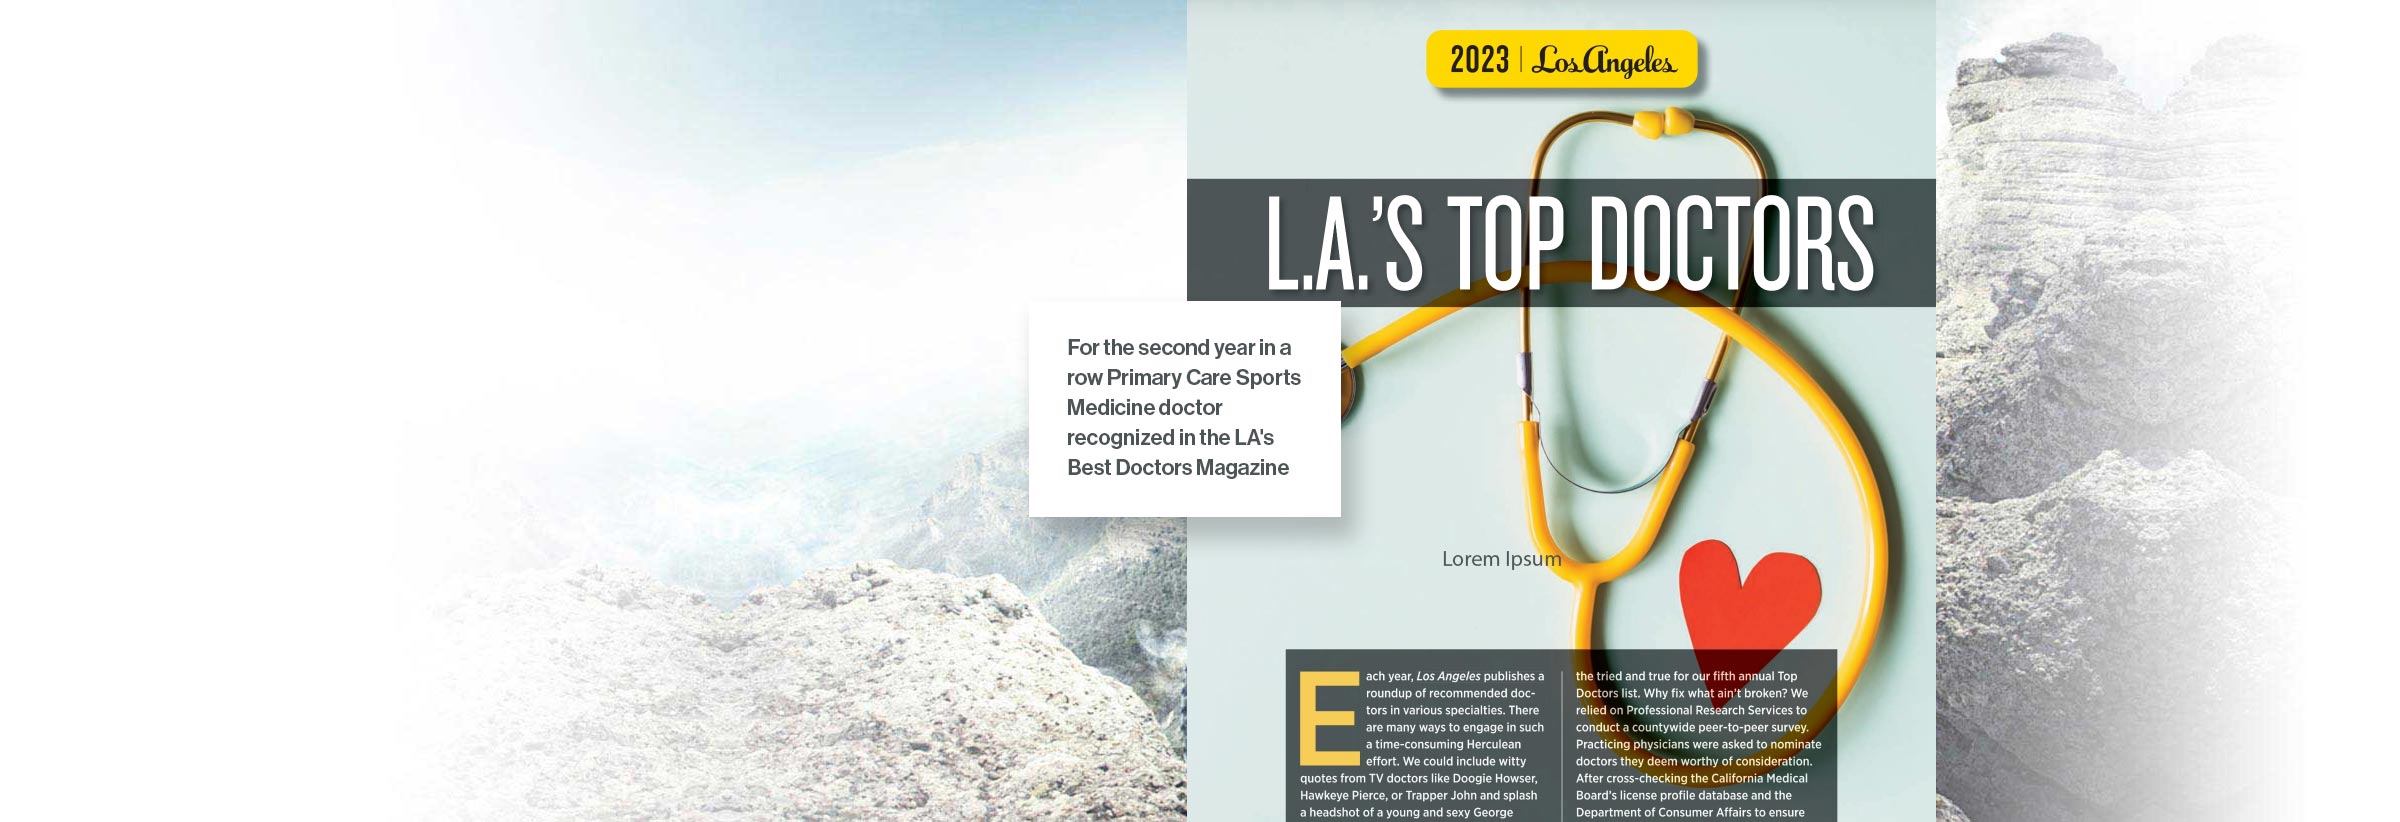 Dr. Patterson & Primary Care Sports Medicine was recognized in L.A.'s Best Doctors Magazine for the last two years 2022 & 2023